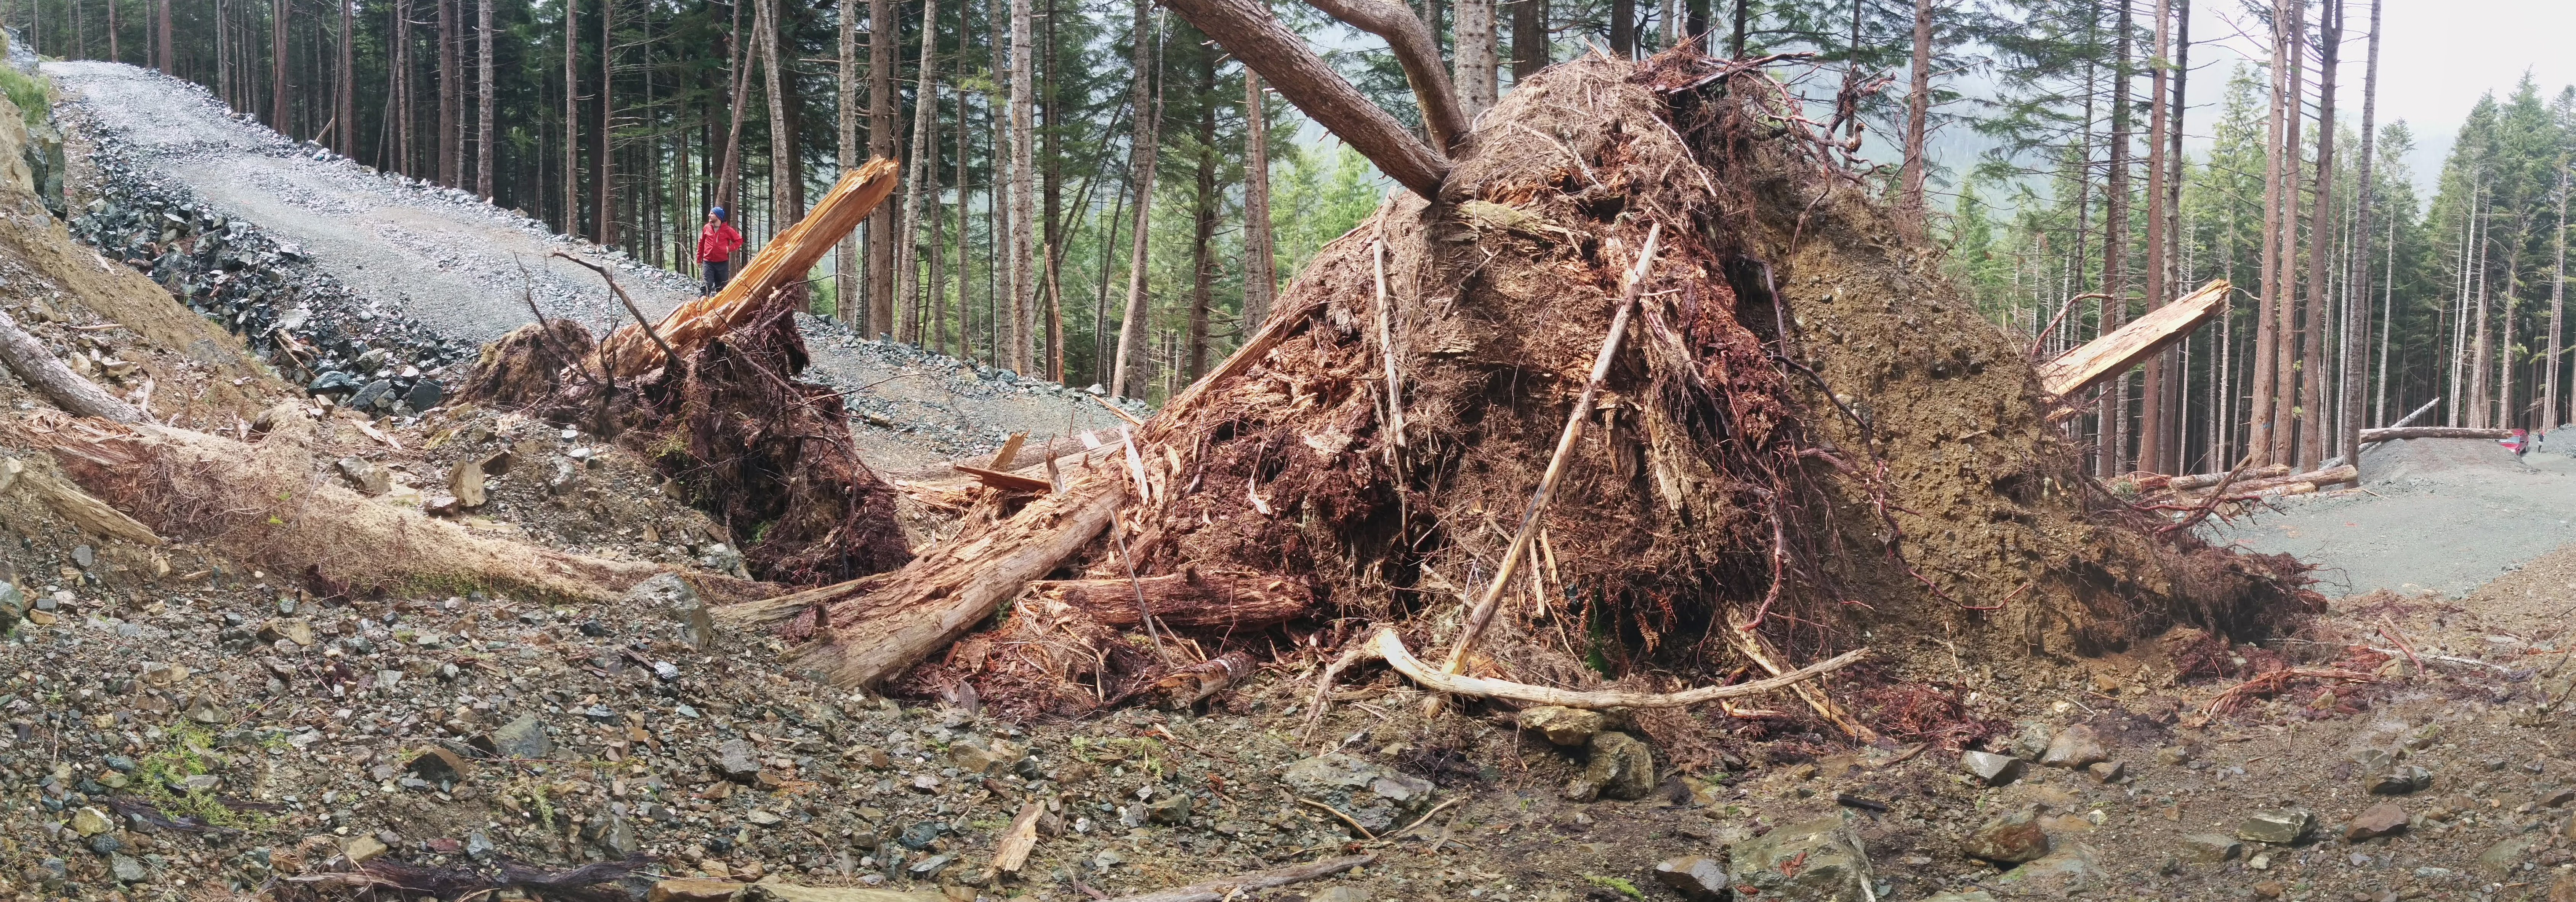 Erosion and fallen trees after BCTS road building in Schmidt's Creek